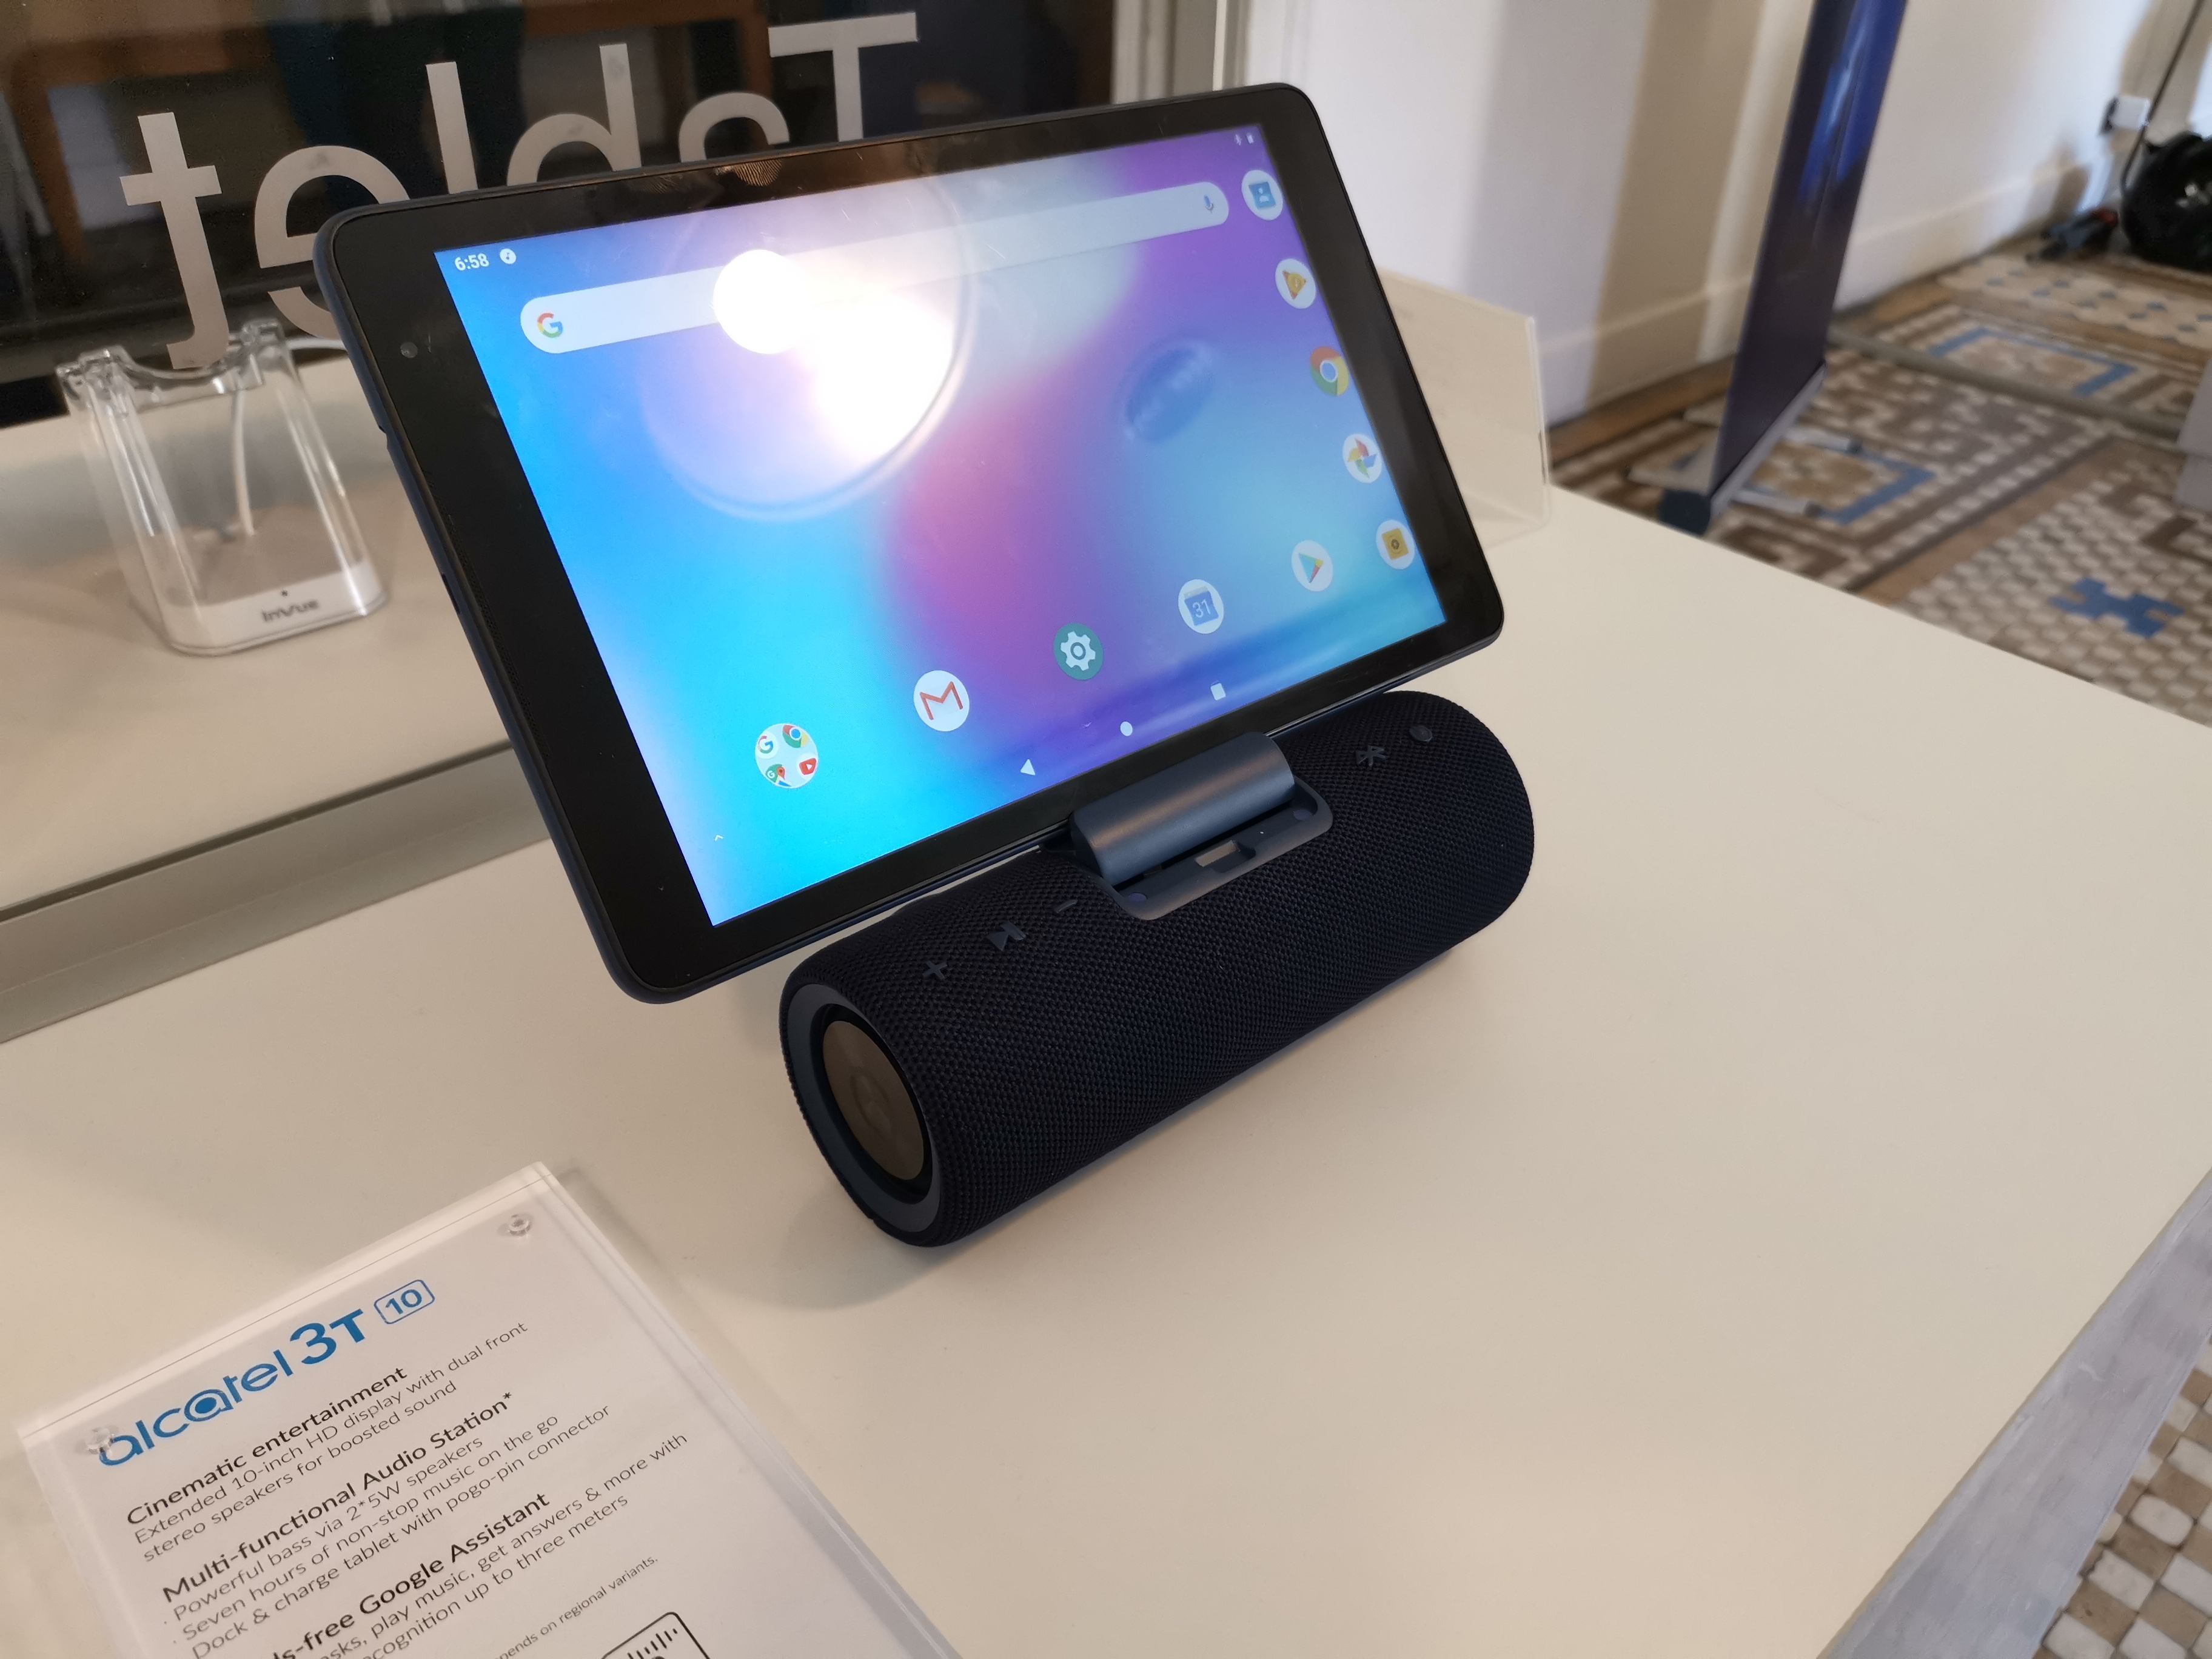 worstelen Beraadslagen rijm Alcatel's newest tablet has a stand that is also a full-sized speaker -  NotebookCheck.net News